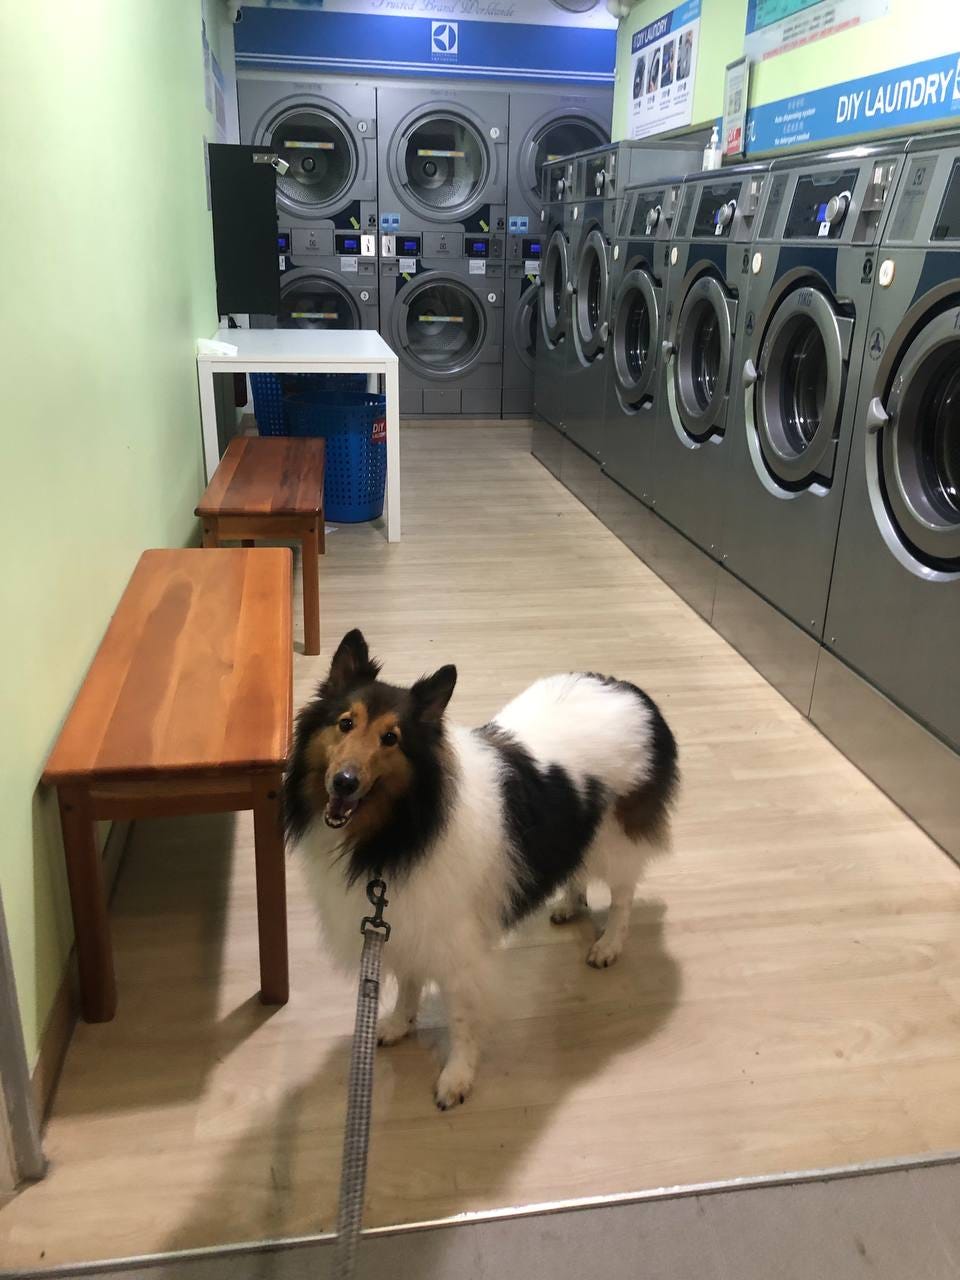 Dog looking happy inside a laundromat by a row of washing machines.